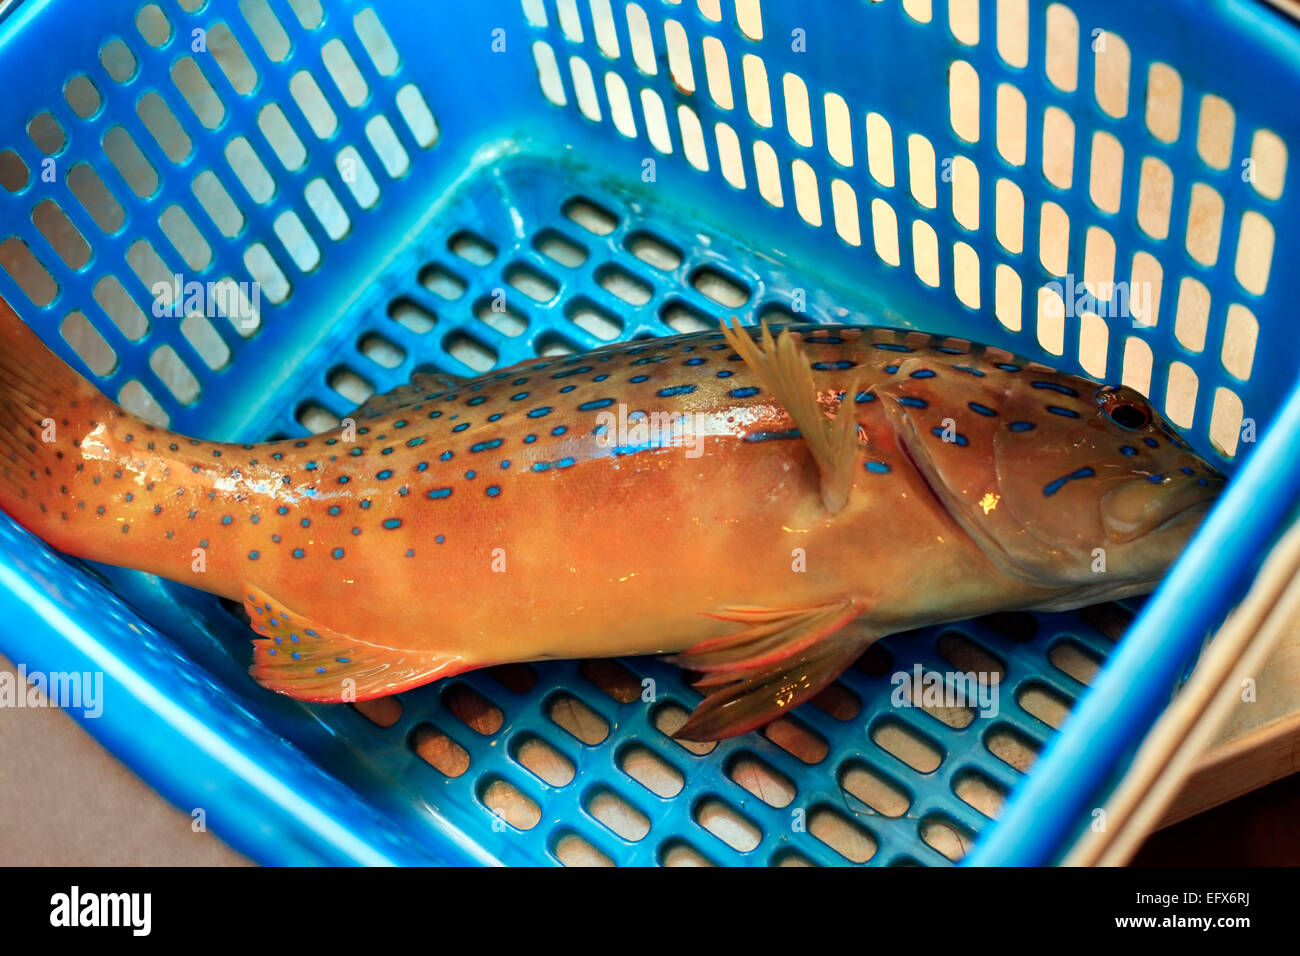 Freshly caught coral grouper fish in the blue basket Stock Photo